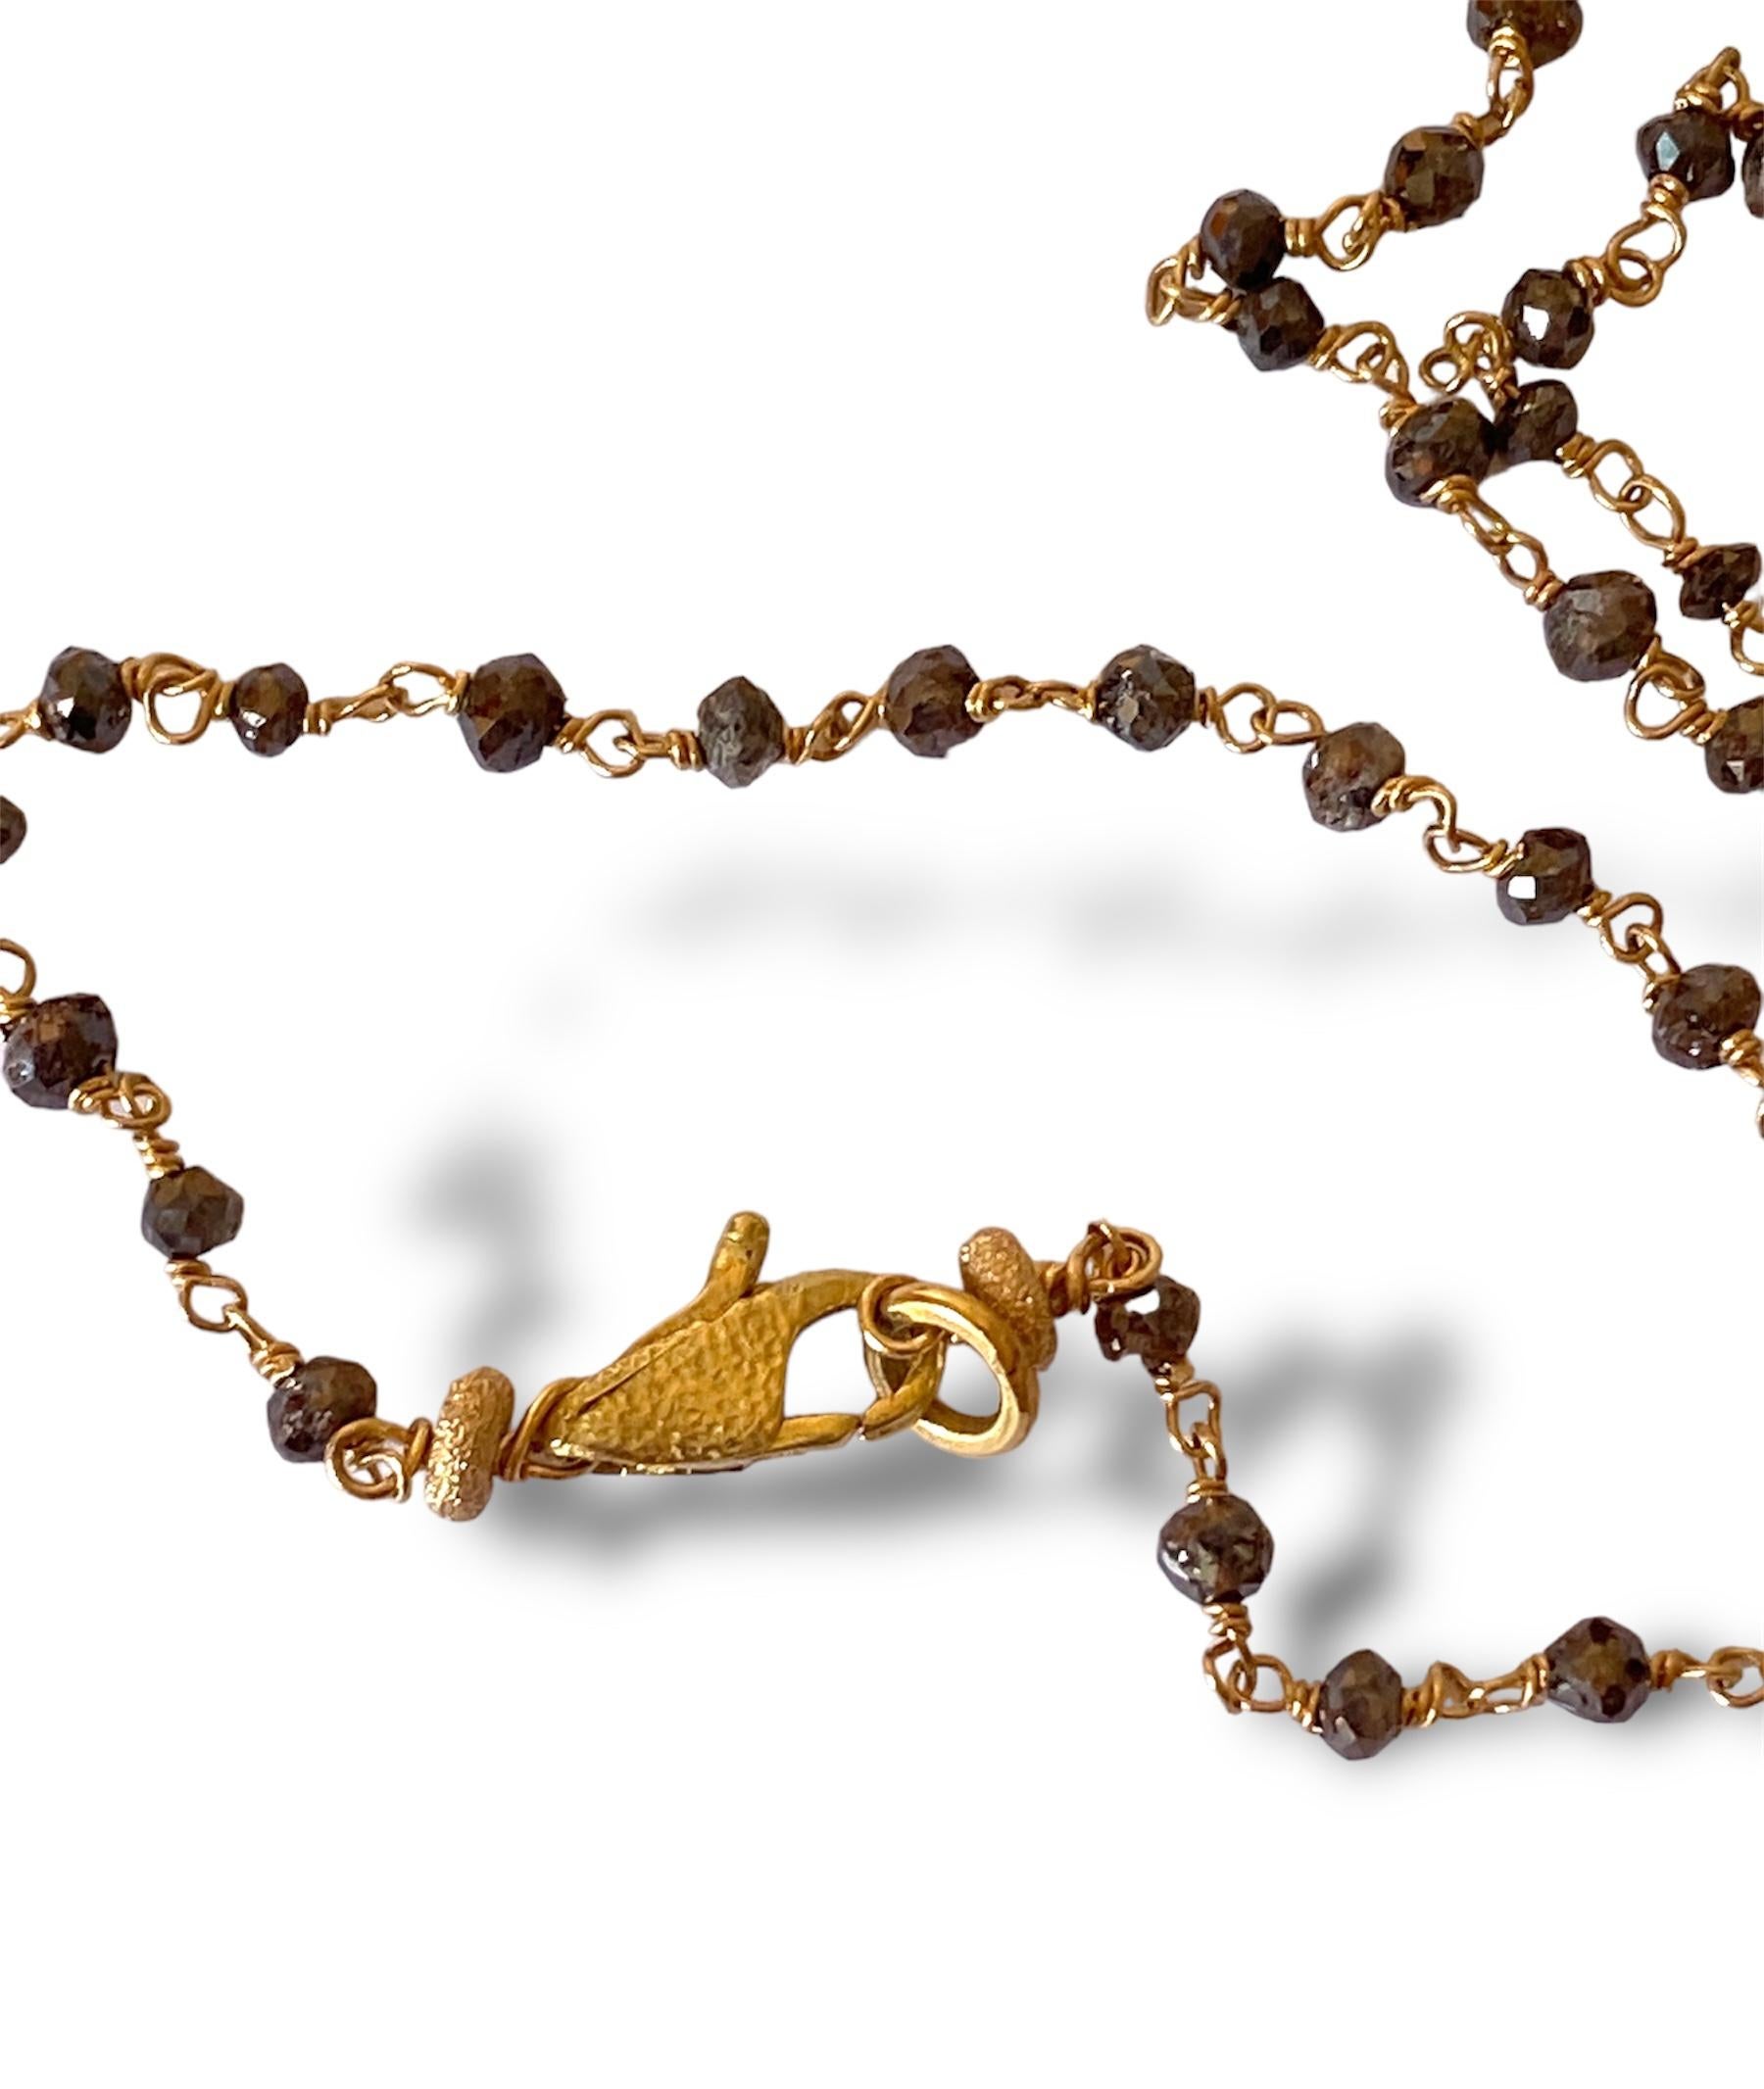 Handcrafted Brown Diamonds Beads Necklace 18k Gold, 18.4 Carats For Sale 7